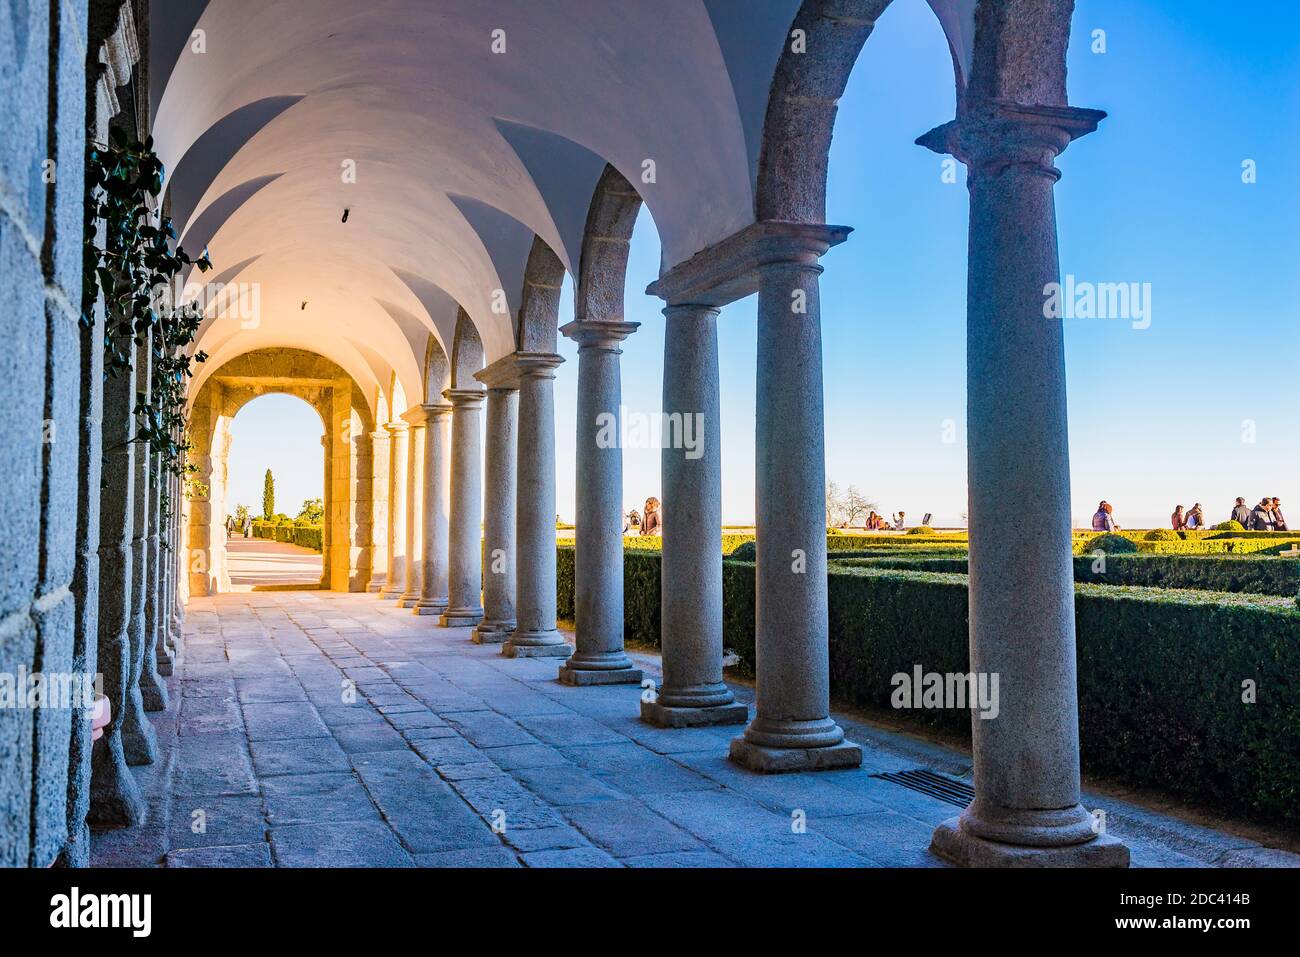 Colonnades on the south facade. The Royal Site of San Lorenzo de El Escorial. San Lorenzo de El Escorial, Madrid, Spain, Europe Stock Photo